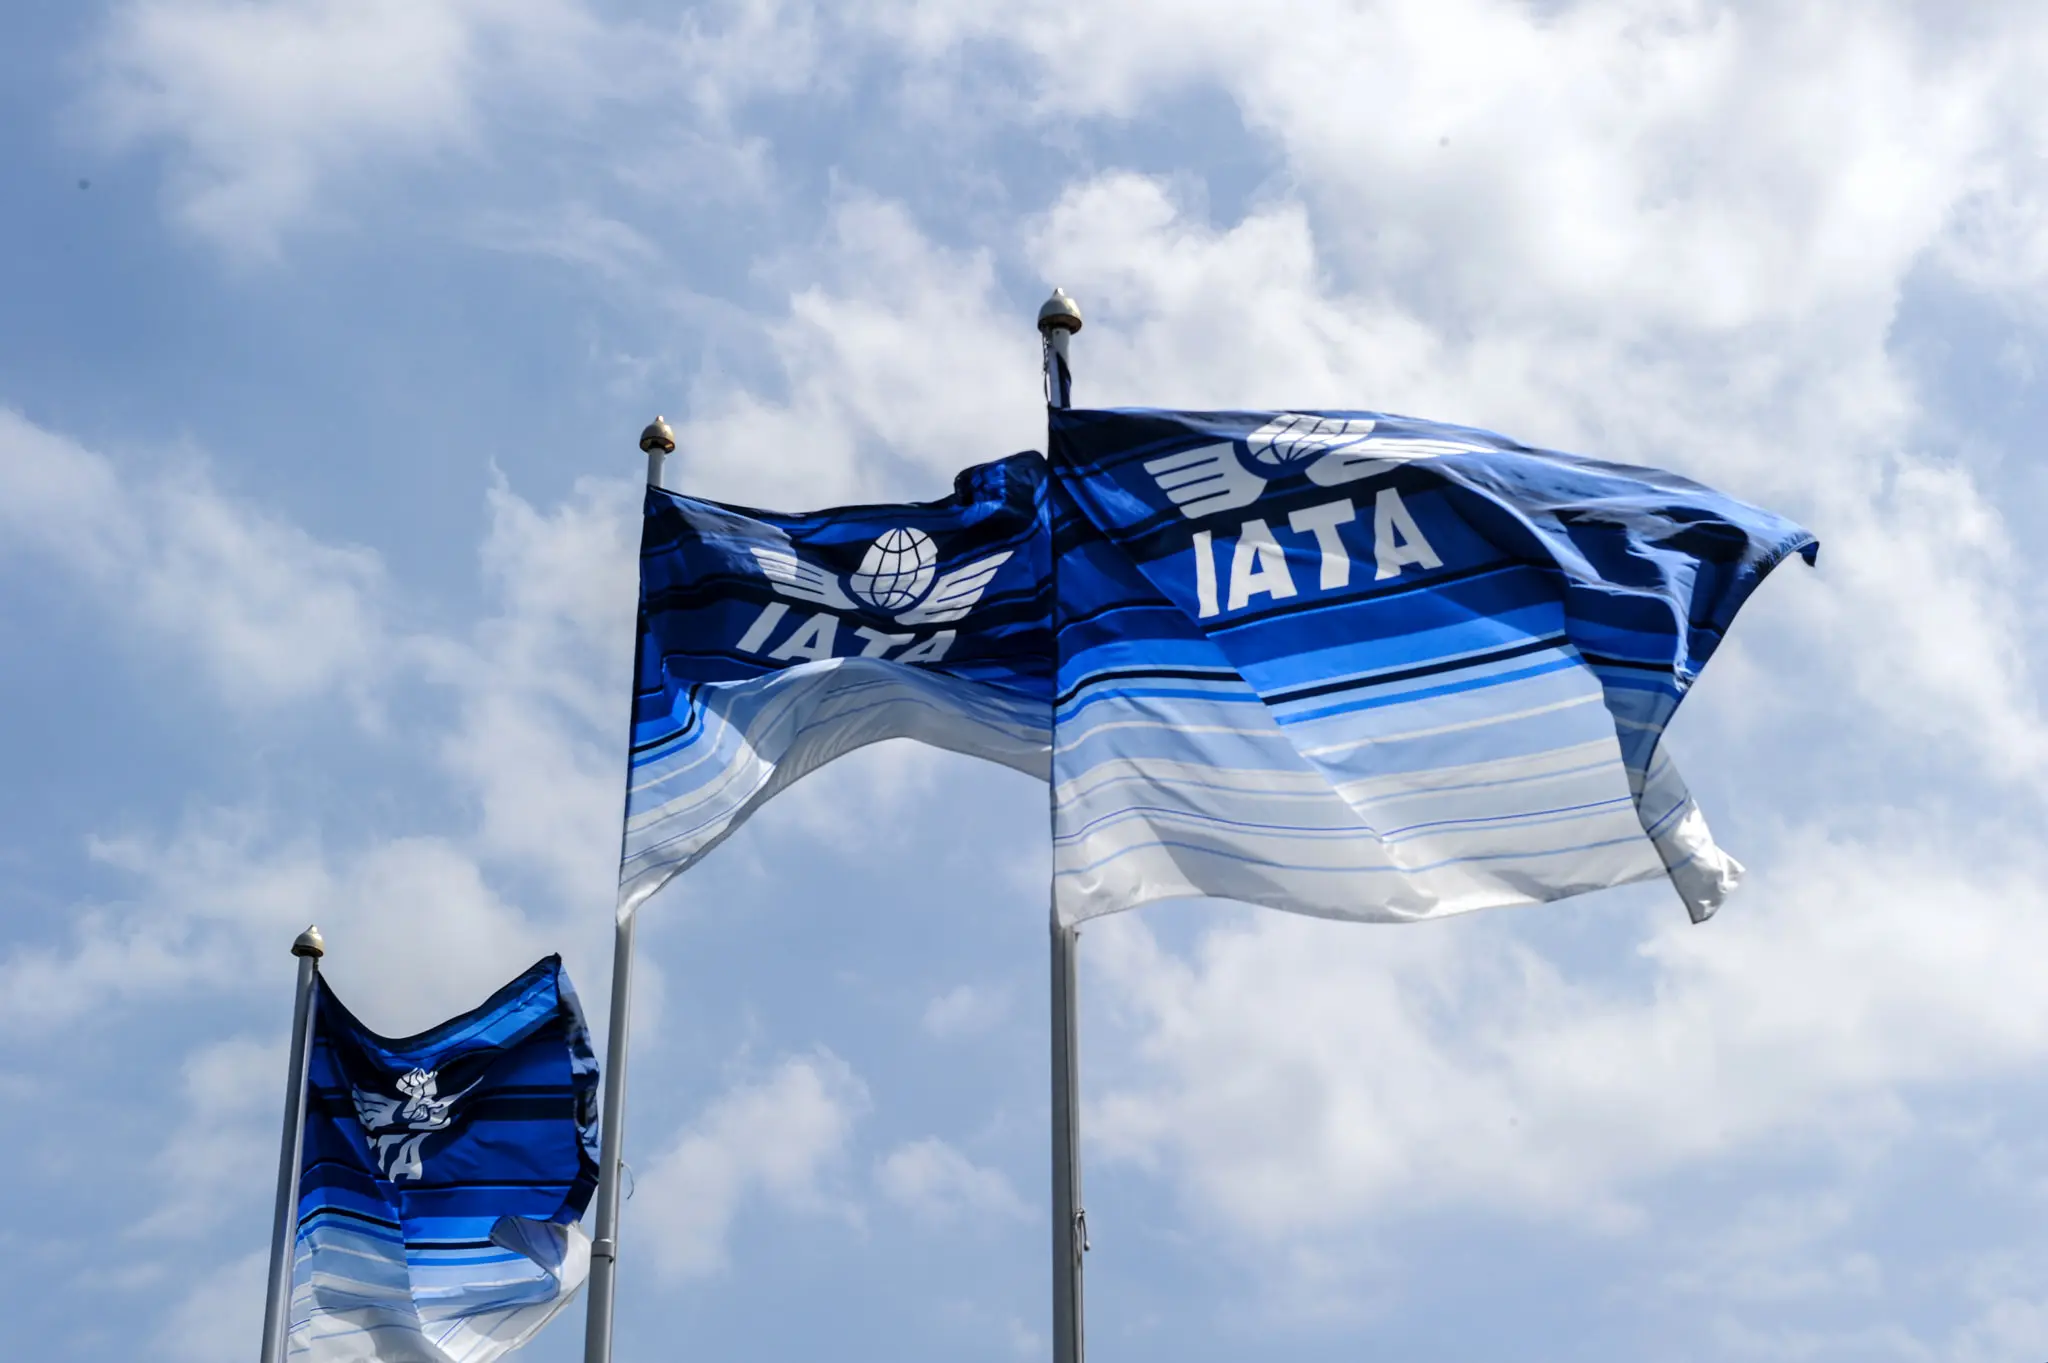 DSNA and IATA to Cooperate on French ATM Strategy 